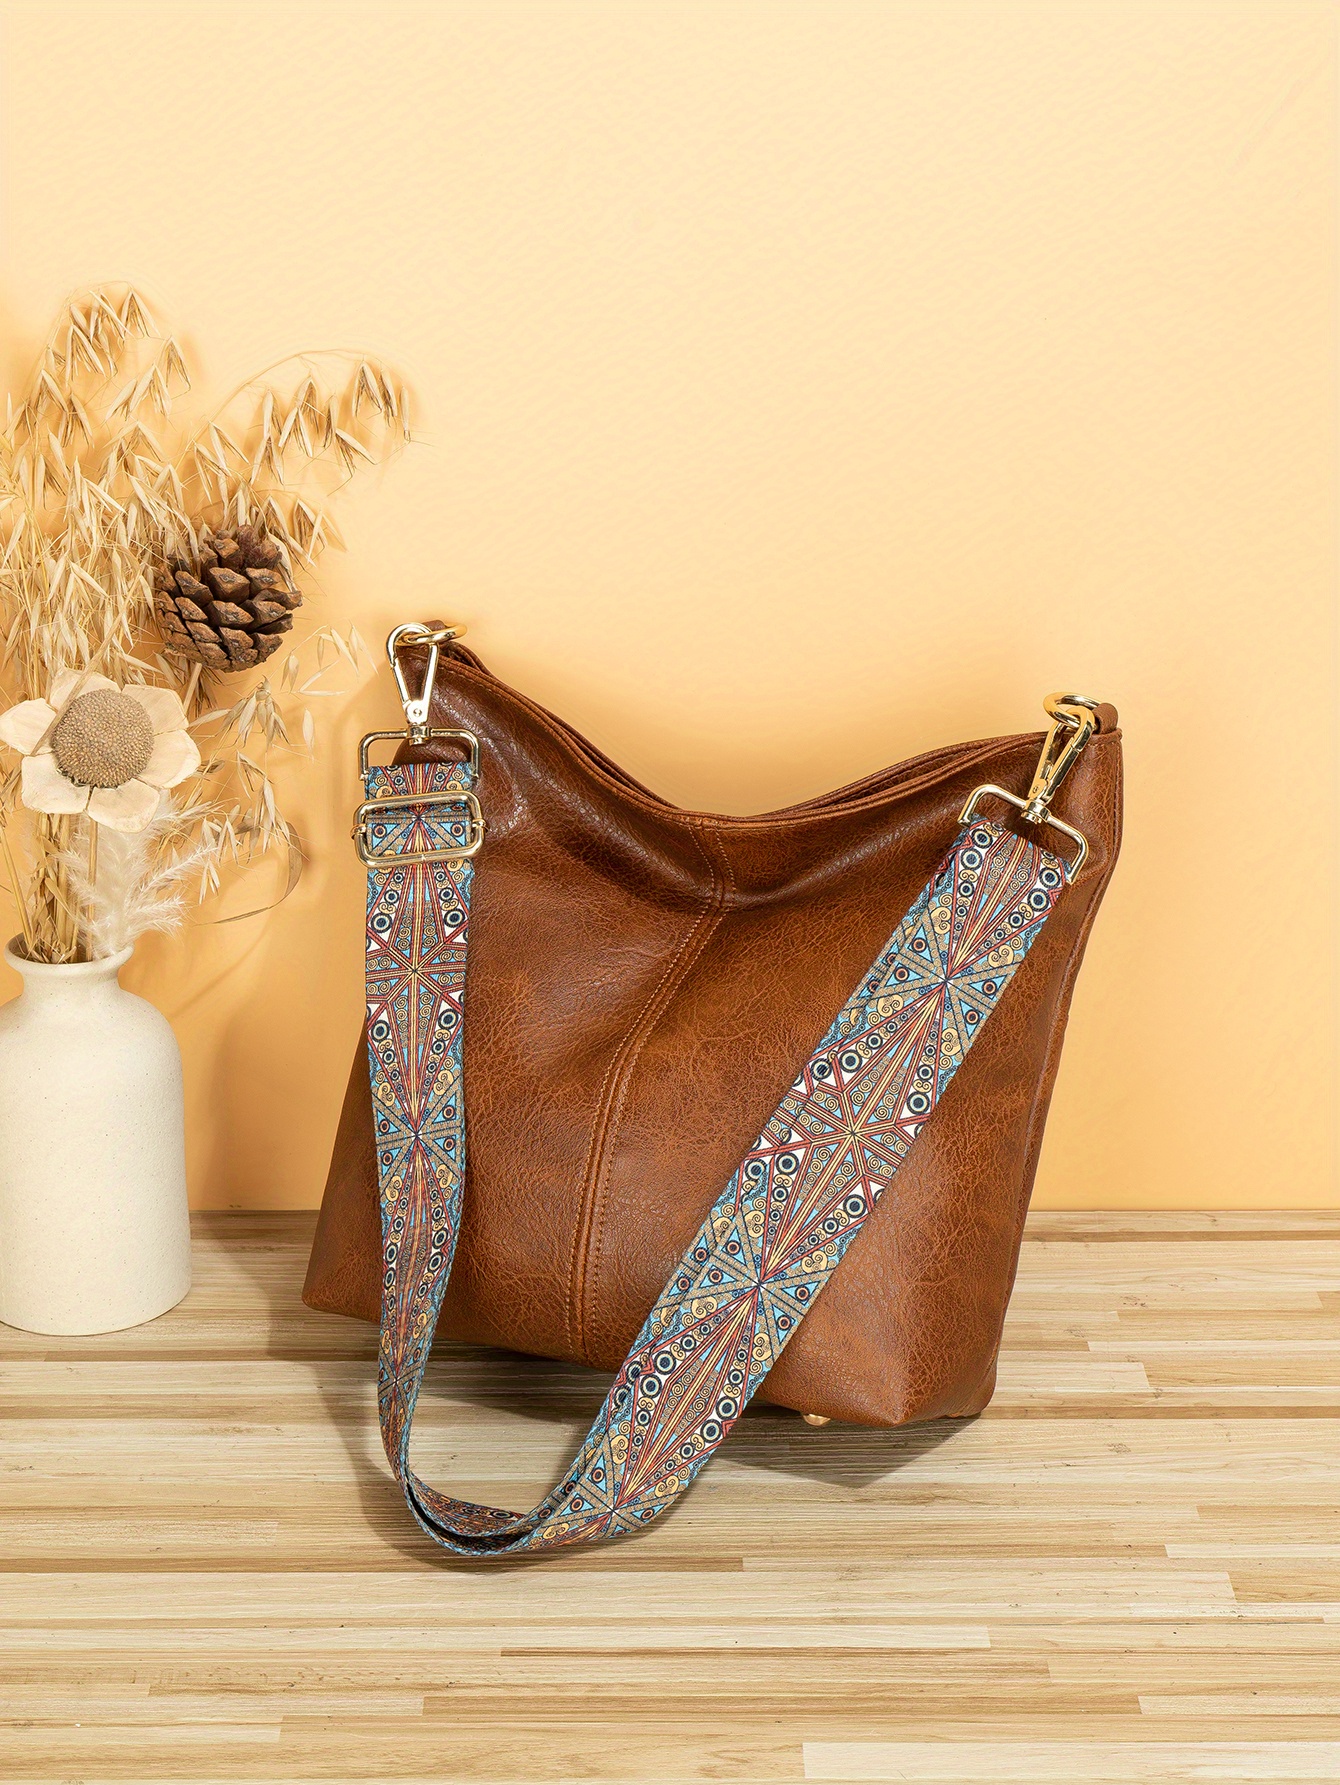 Guitar Strap Purse, Crossbody With Guitar Strap, Leather Shoulder